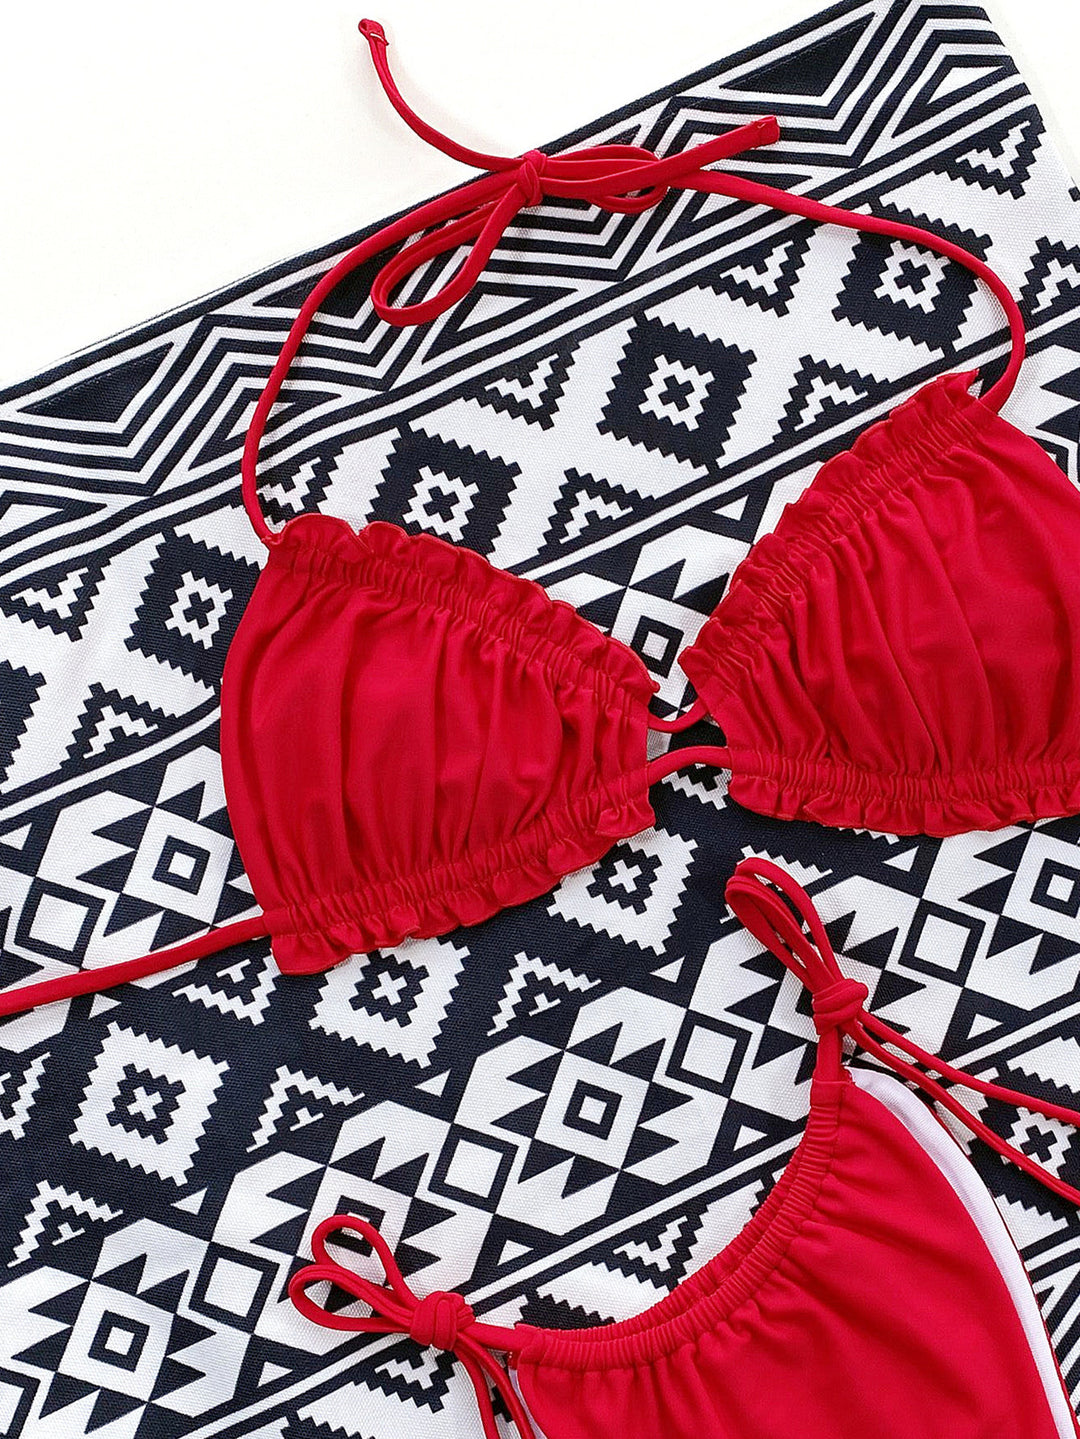 two red bikinisuits laying on a black and white pattern